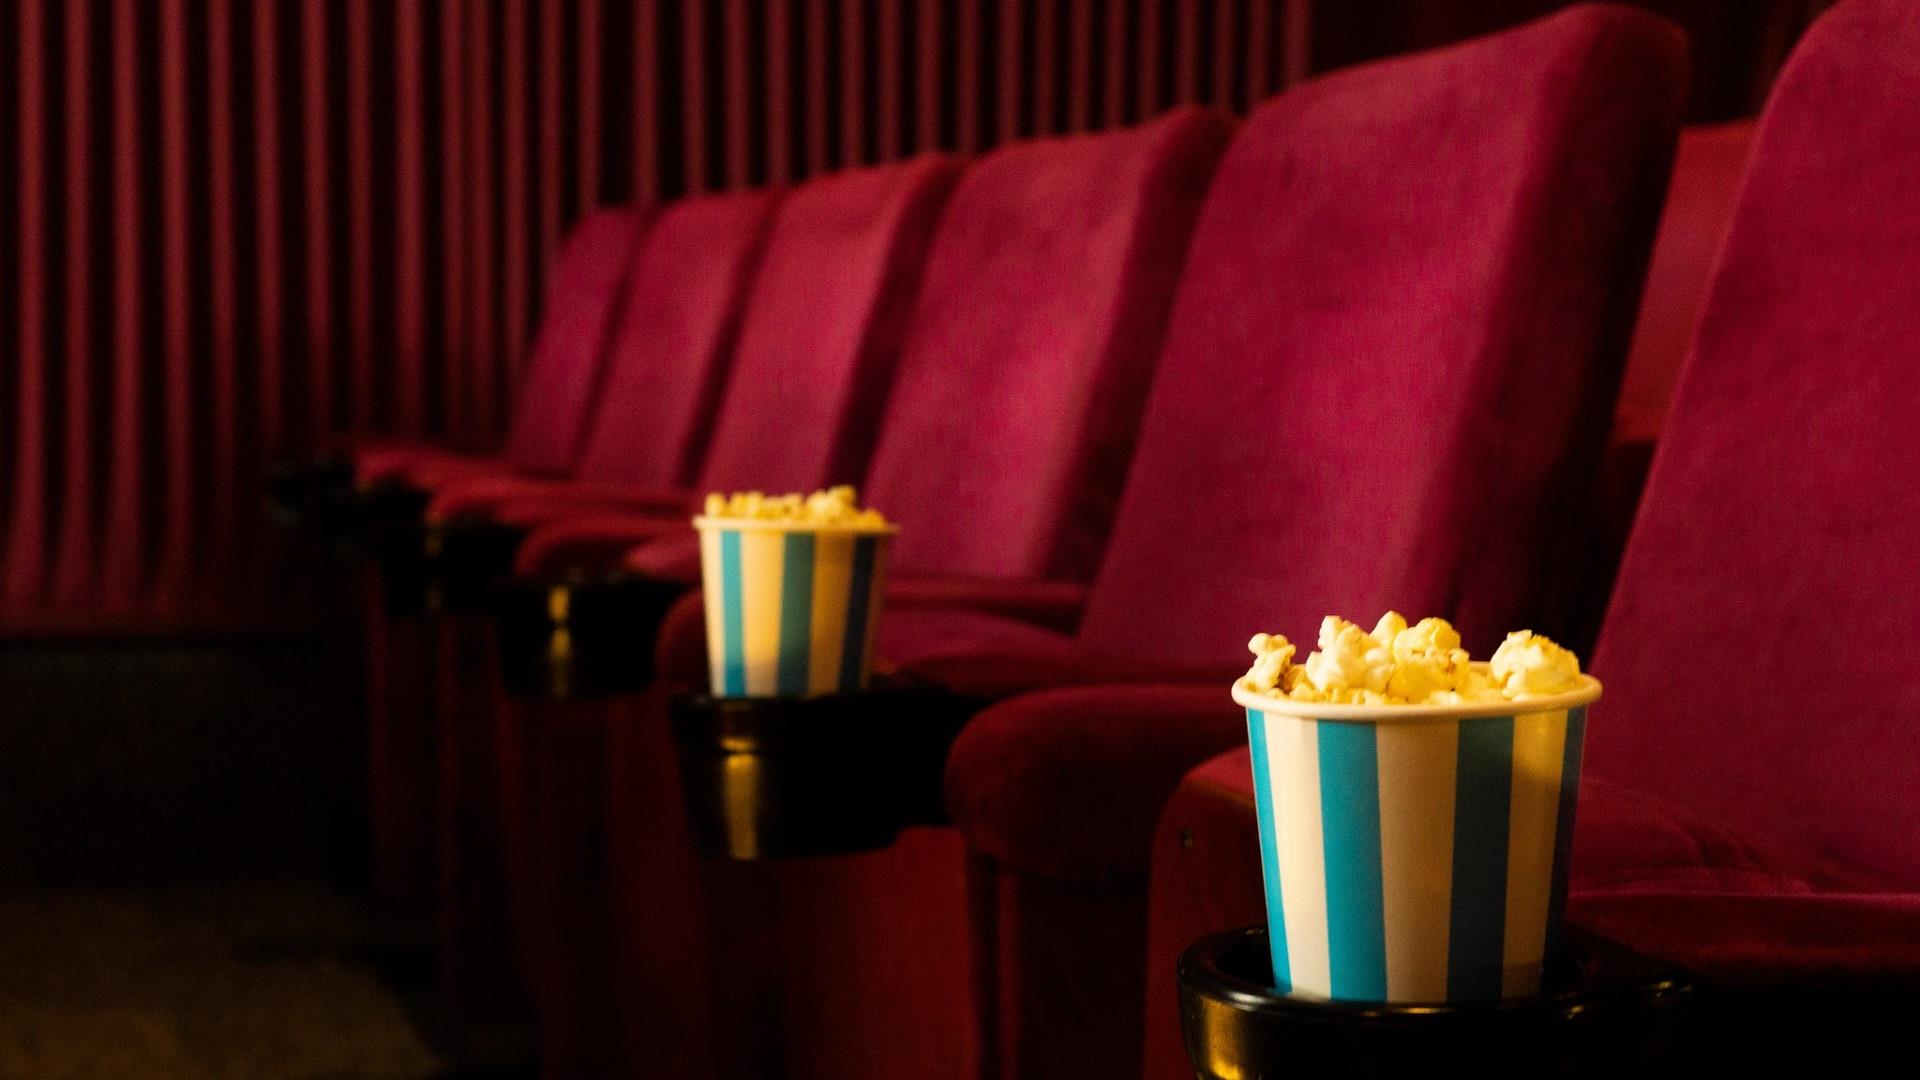 red cinema chairs with buckets of popcorn in the arm rest holder